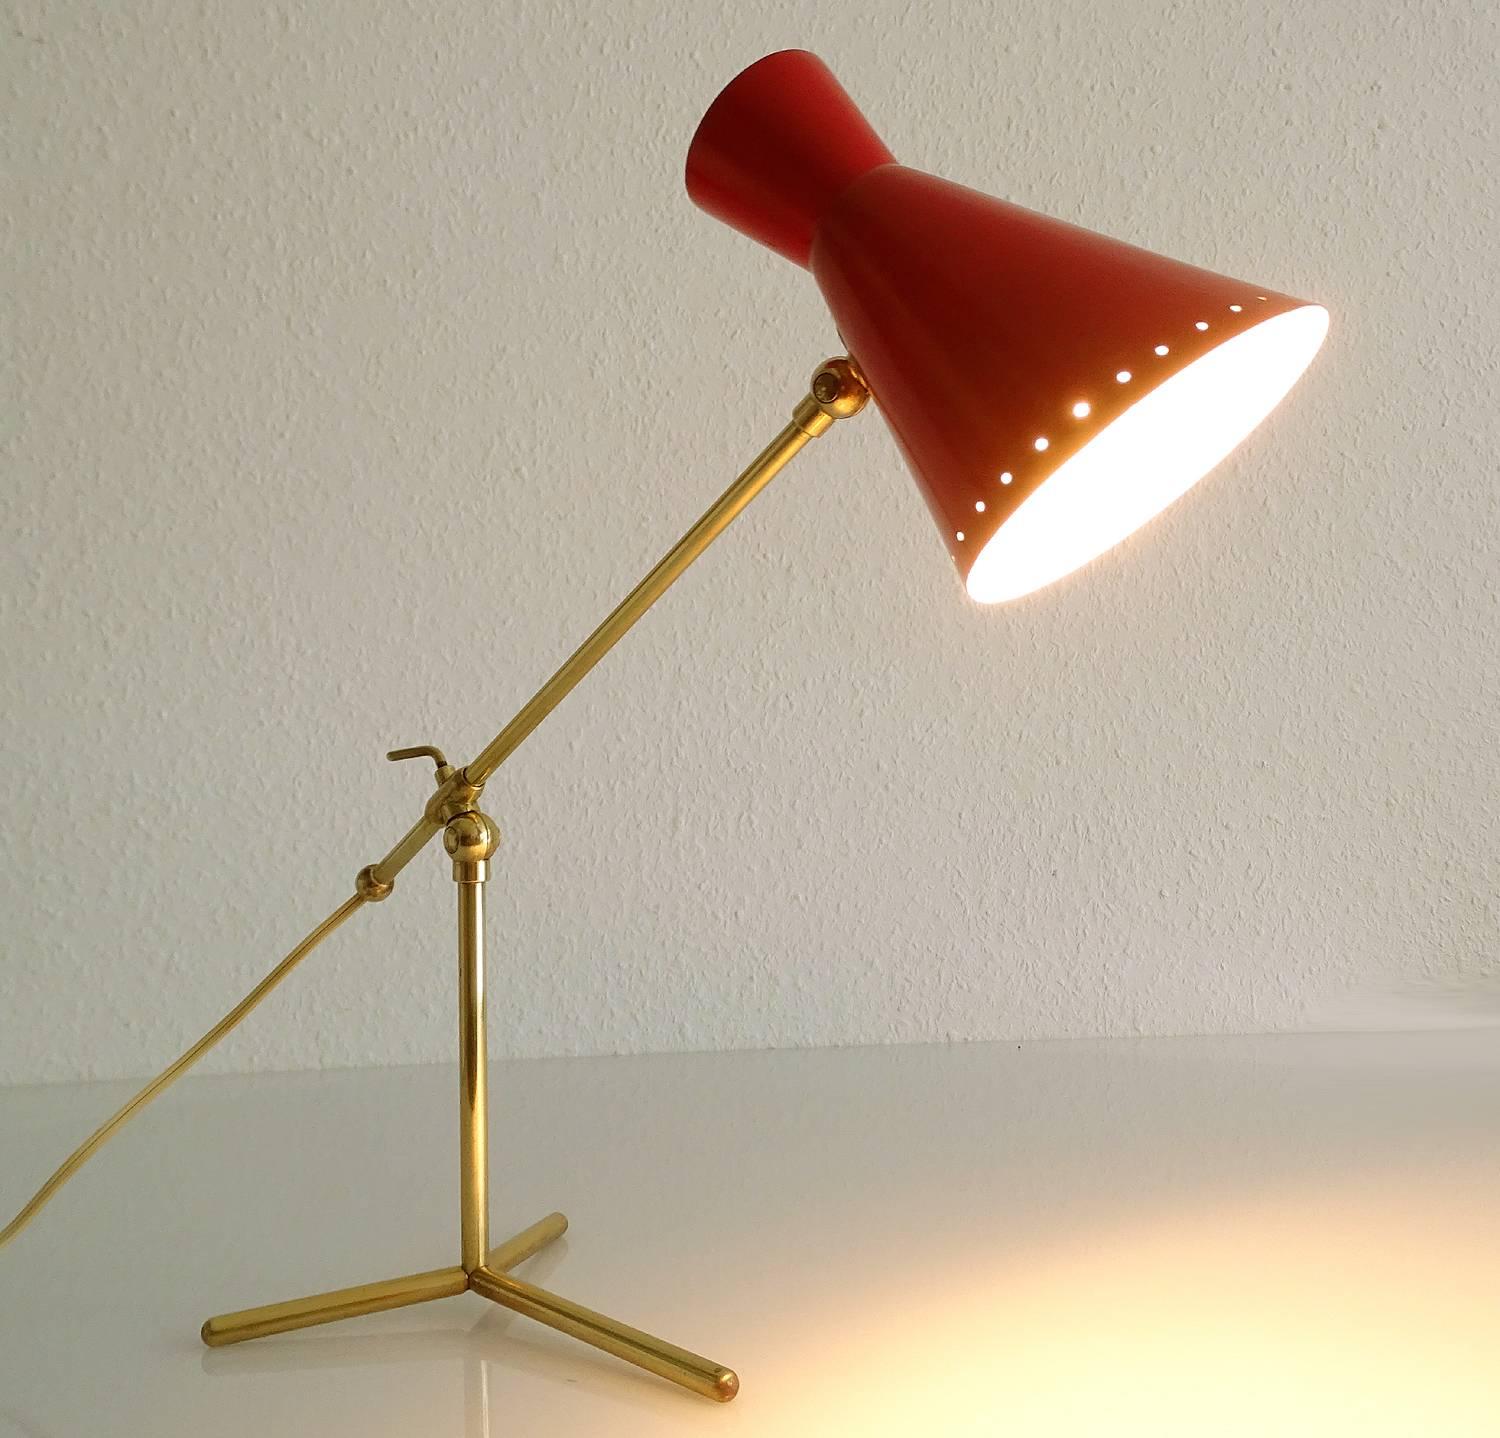 An adjustable Stilnovo design desk lamp with louvered diabolo shade, the arm can be moved back and forth, its overall can be adjusted,

one candelabra size bulb.

Vintage Italian lights manufacturing companies like Stilnovo  and Arredoluce, had